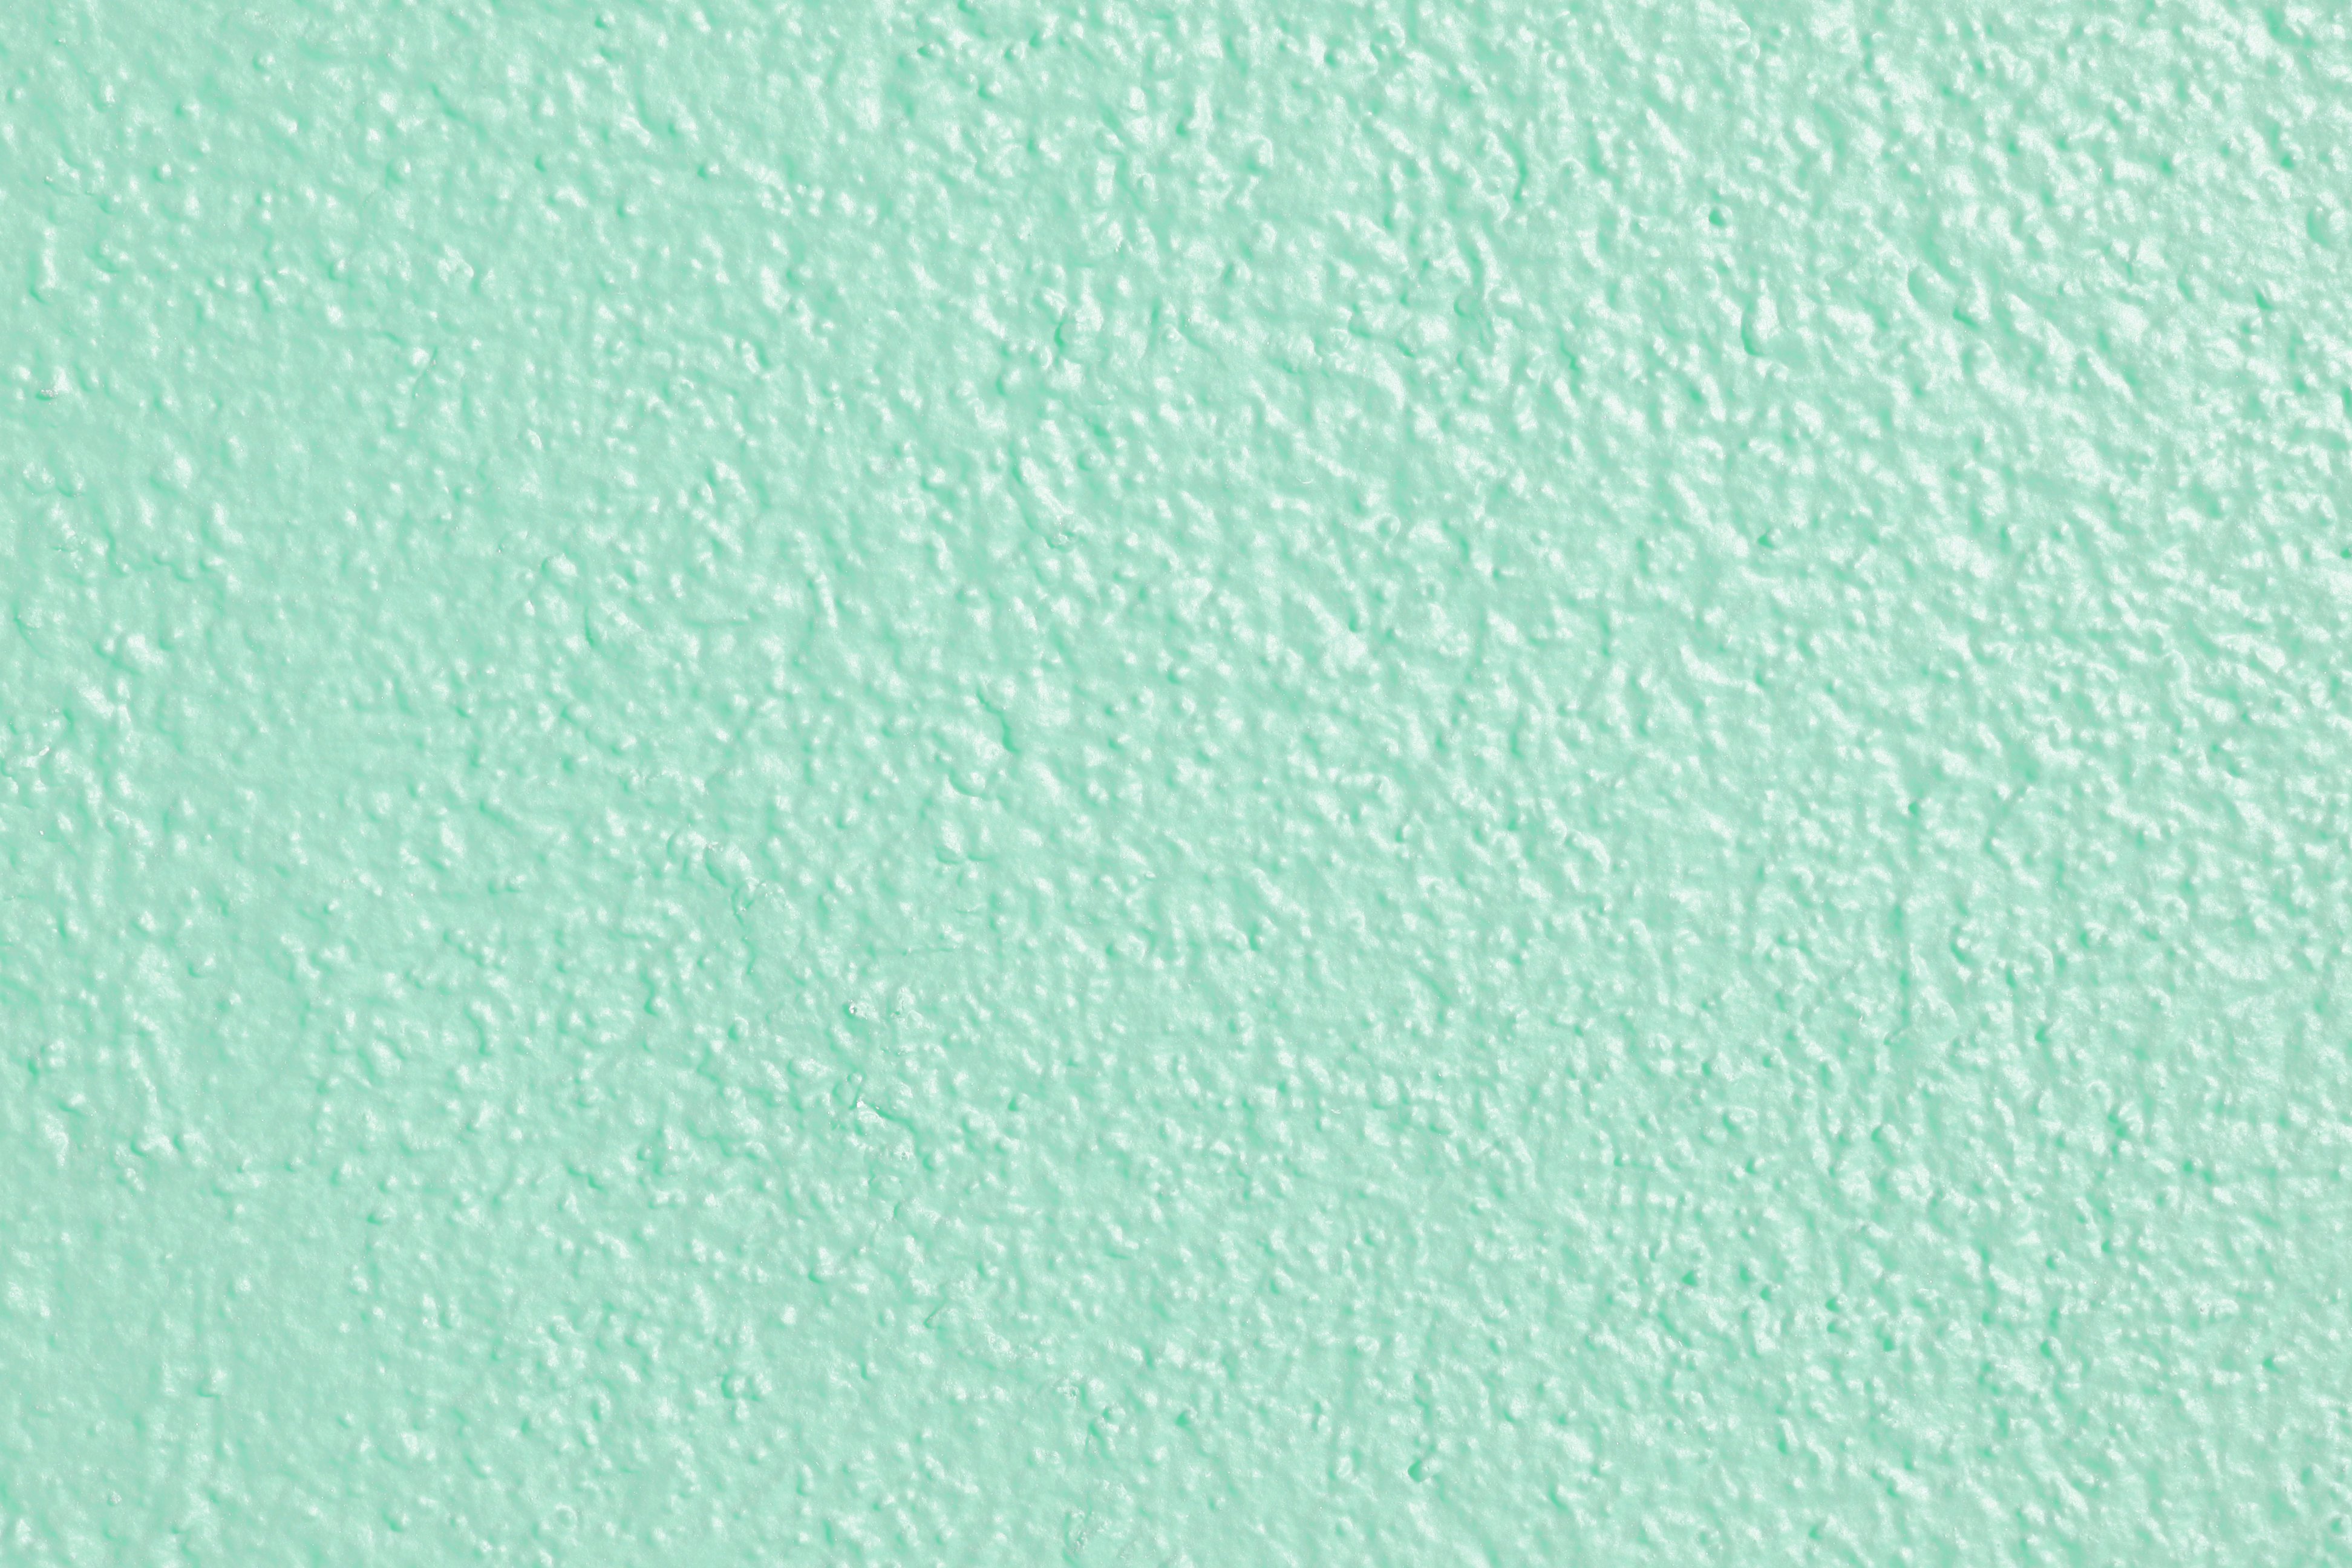 Mint Green Painted Wall Texture Photograph Photos - DMA Homes | #35027